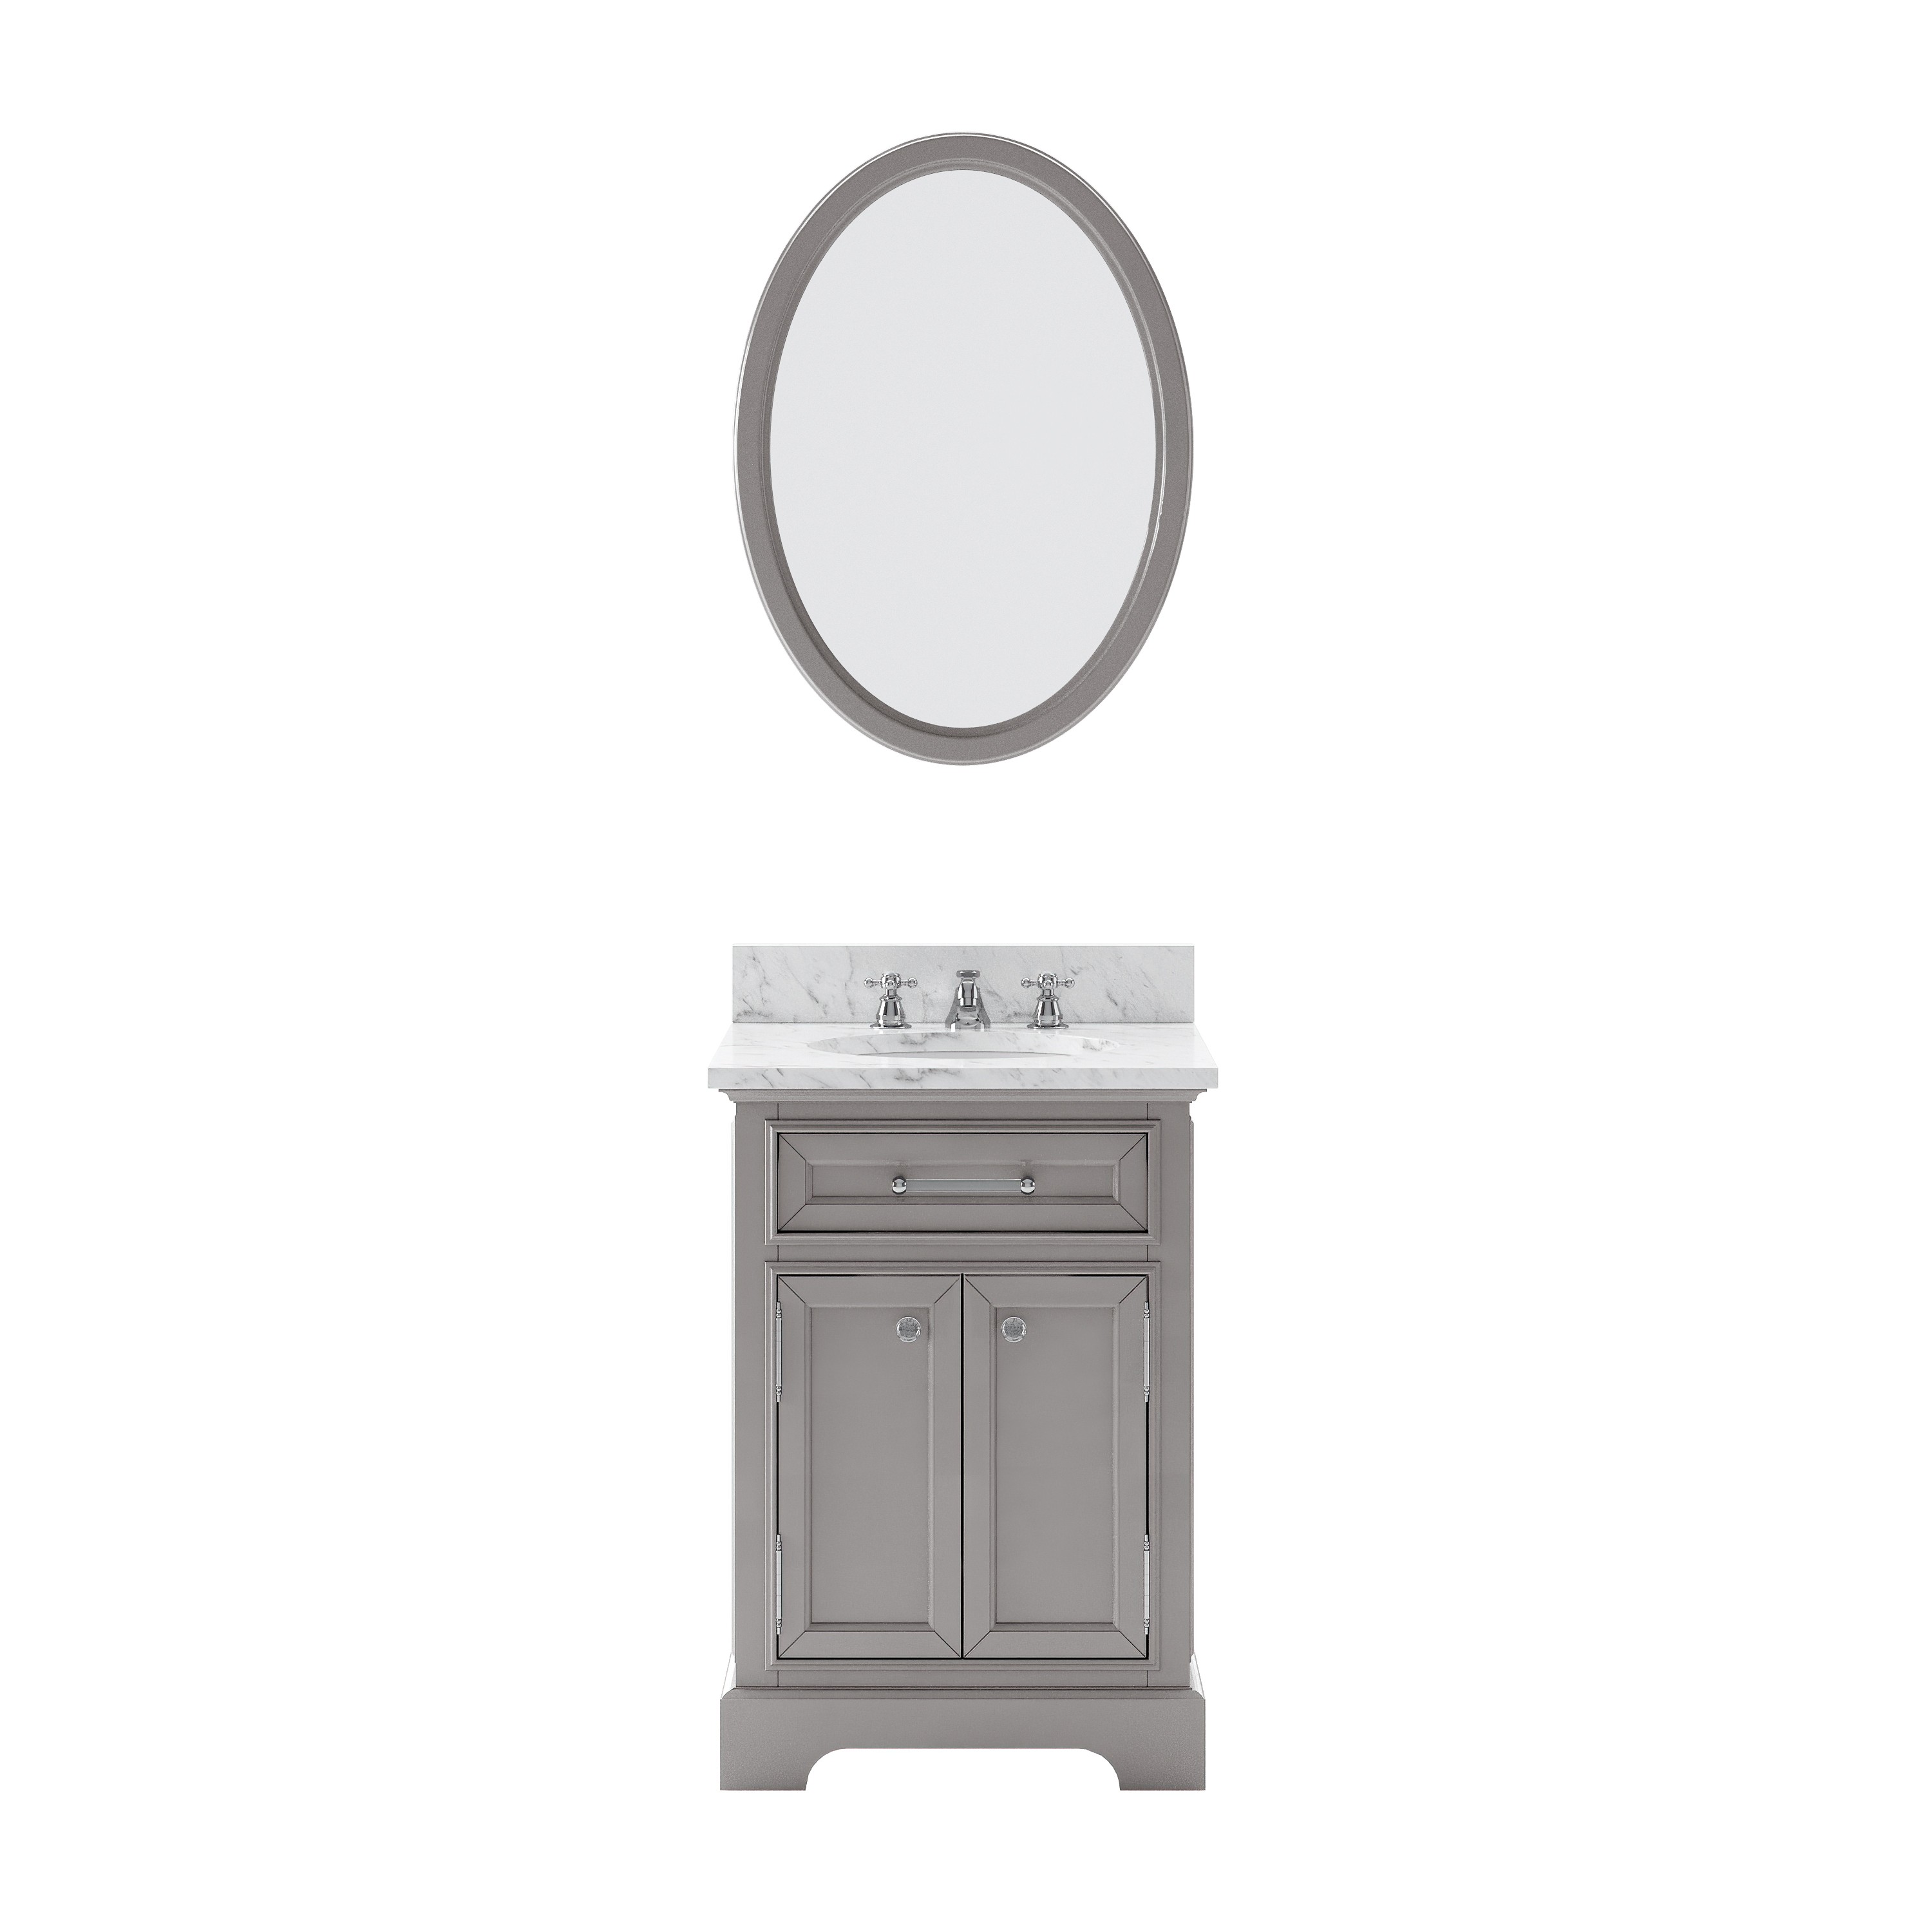 WATER-CREATION DE24CW01CG-O21BX0901 DERBY 24 INCH CASHMERE GREY SINGLE SINK BATHROOM VANITY WITH MATCHING FRAMED MIRROR AND FAUCET